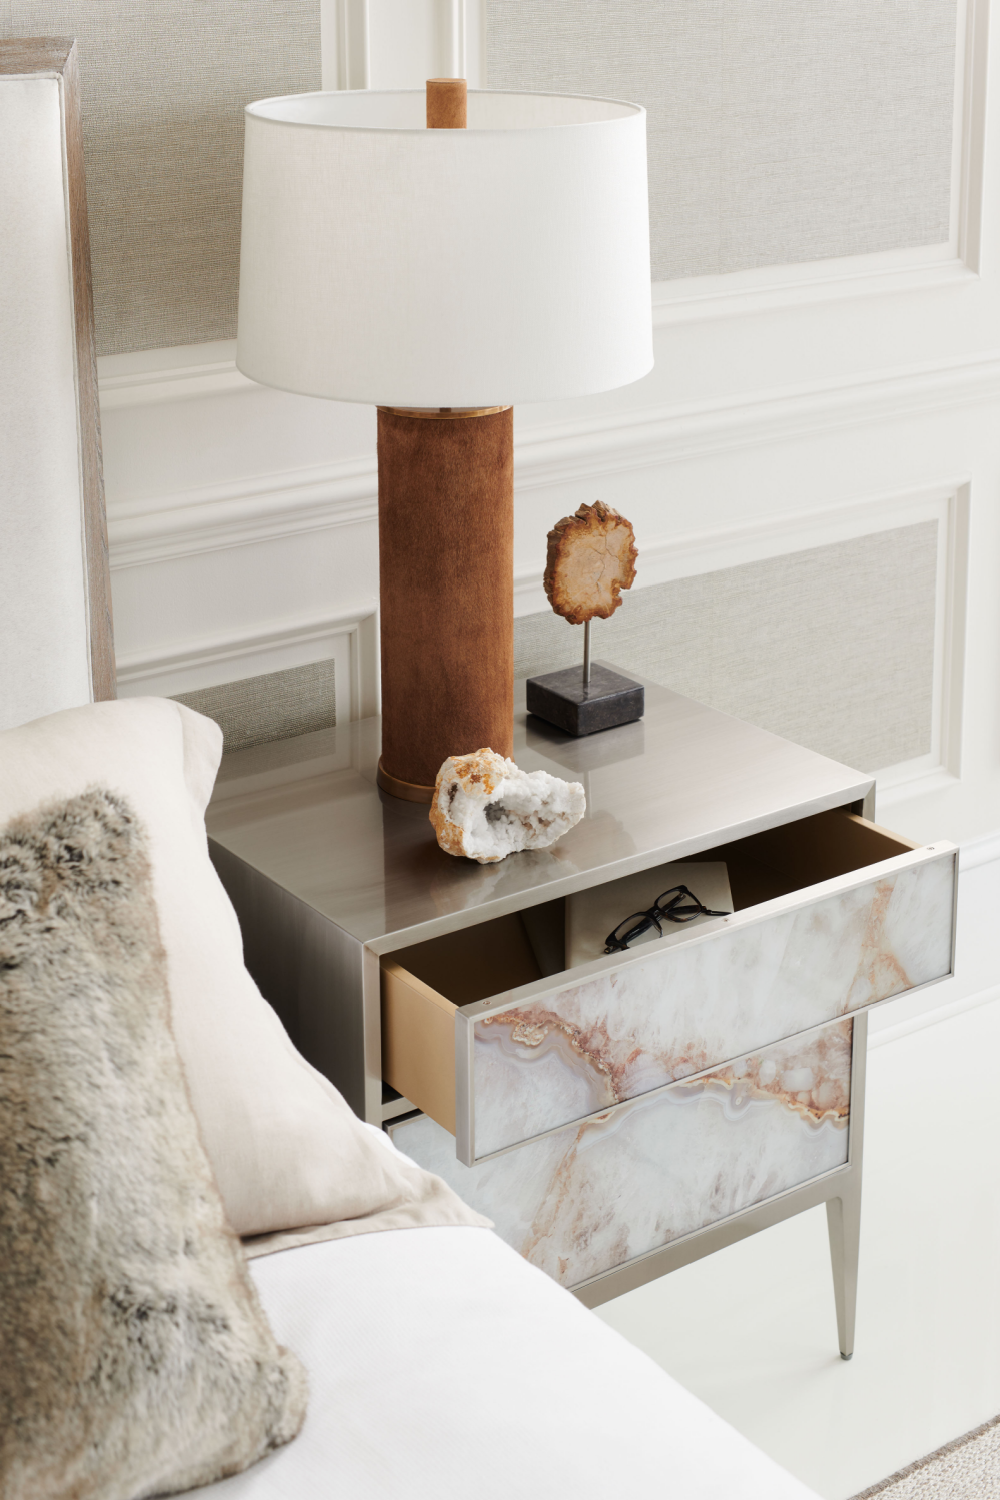 Agate Patterned Modern Nightstand | Caracole Perfect Gem | Oroa.com